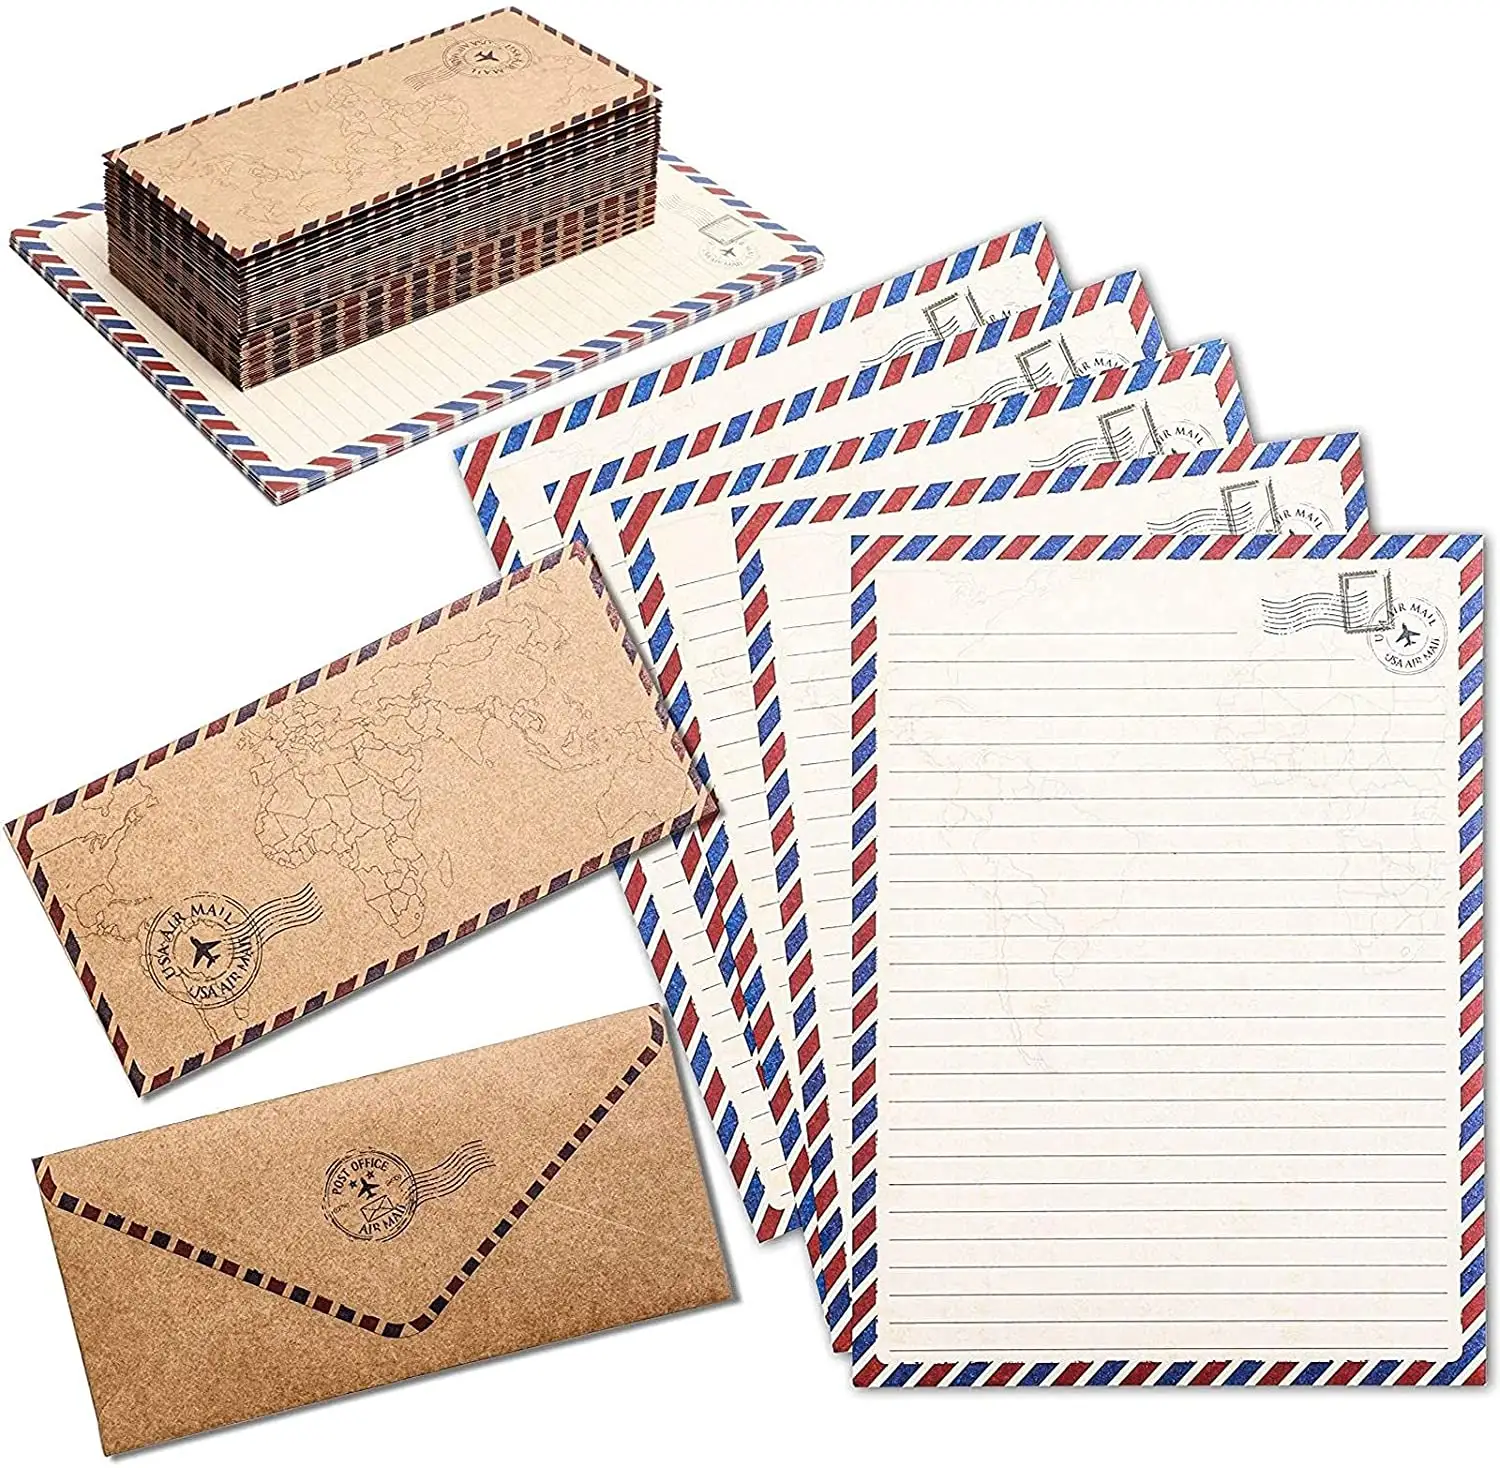 48 Pack Wholesale Factory Price Stationery Paper and Envelopes Set, Penpal Kit for Writing Letters in Travel Design